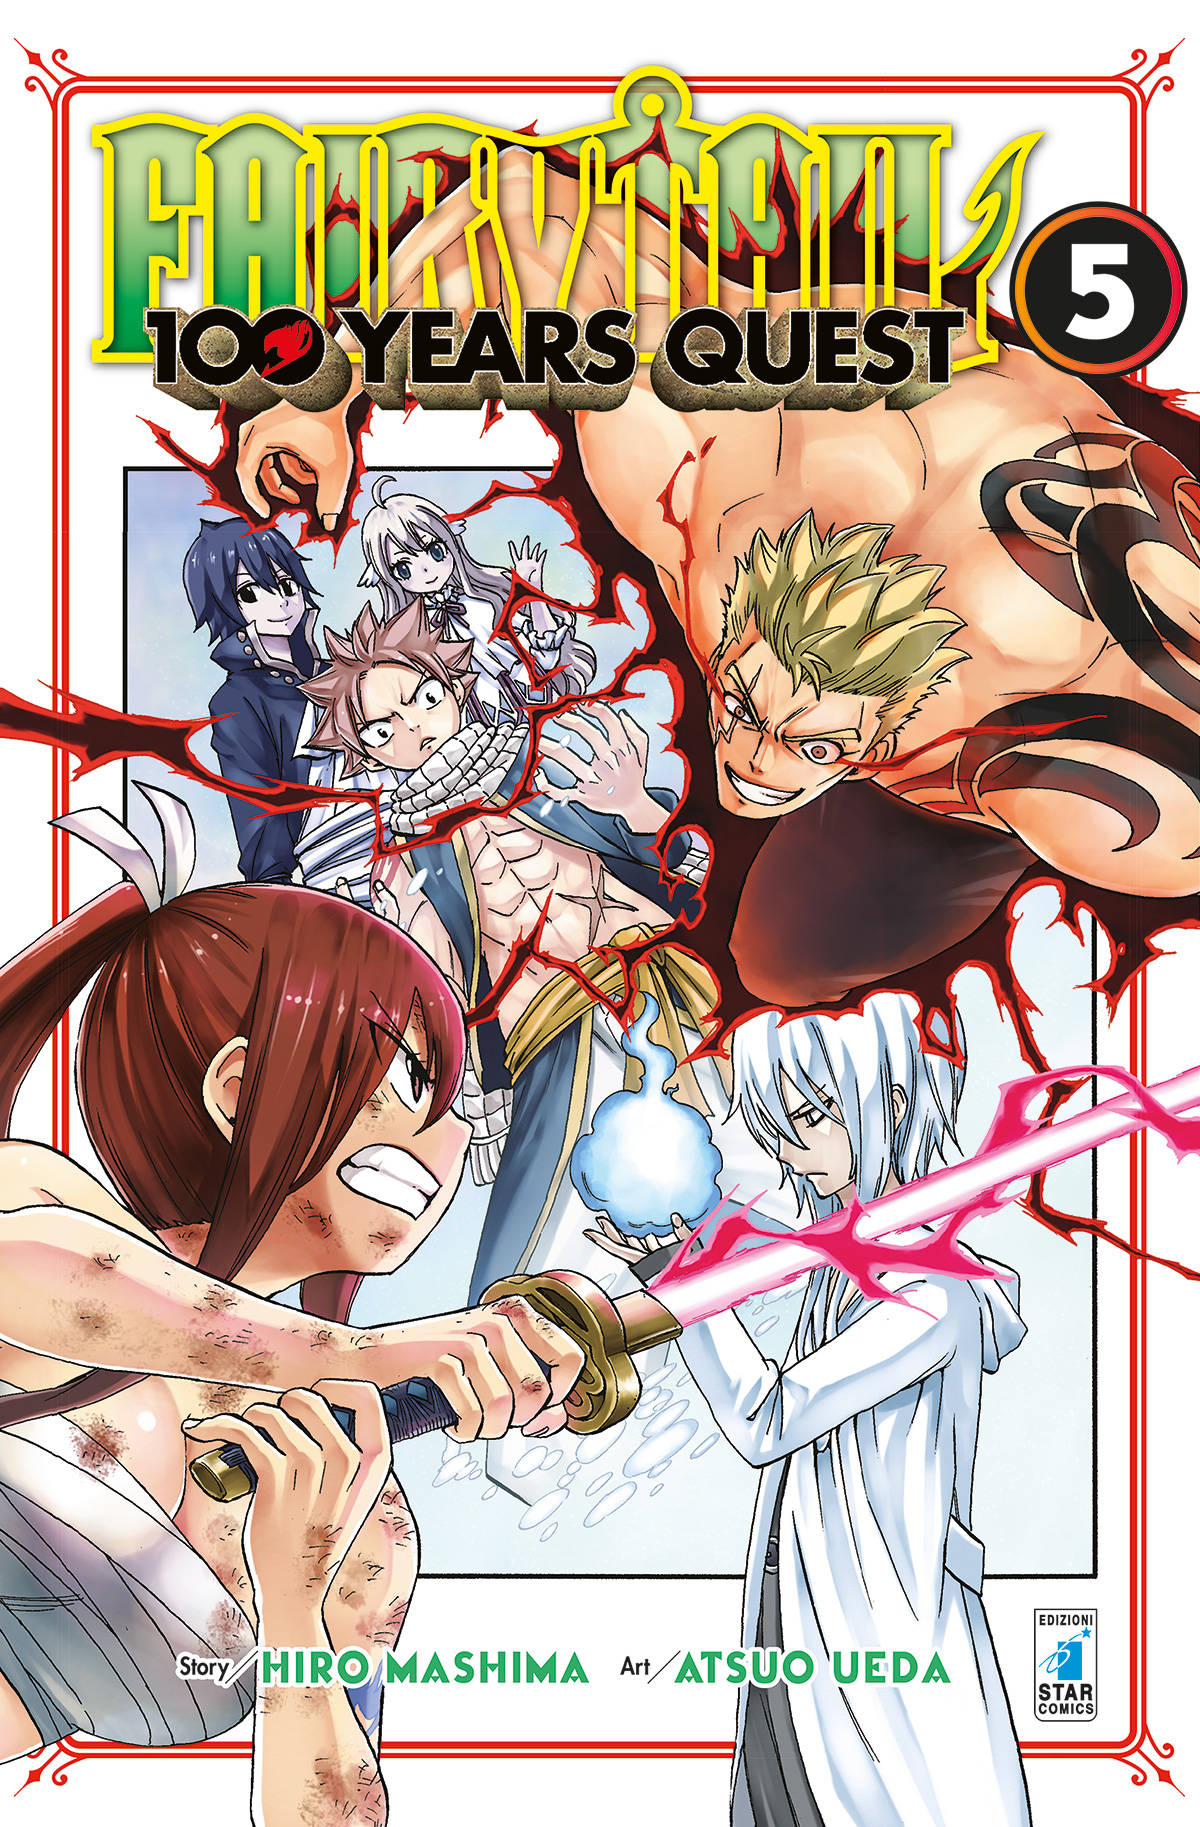 YOUNG #316 FAIRY TAIL 100 YEARS QUEST N.05